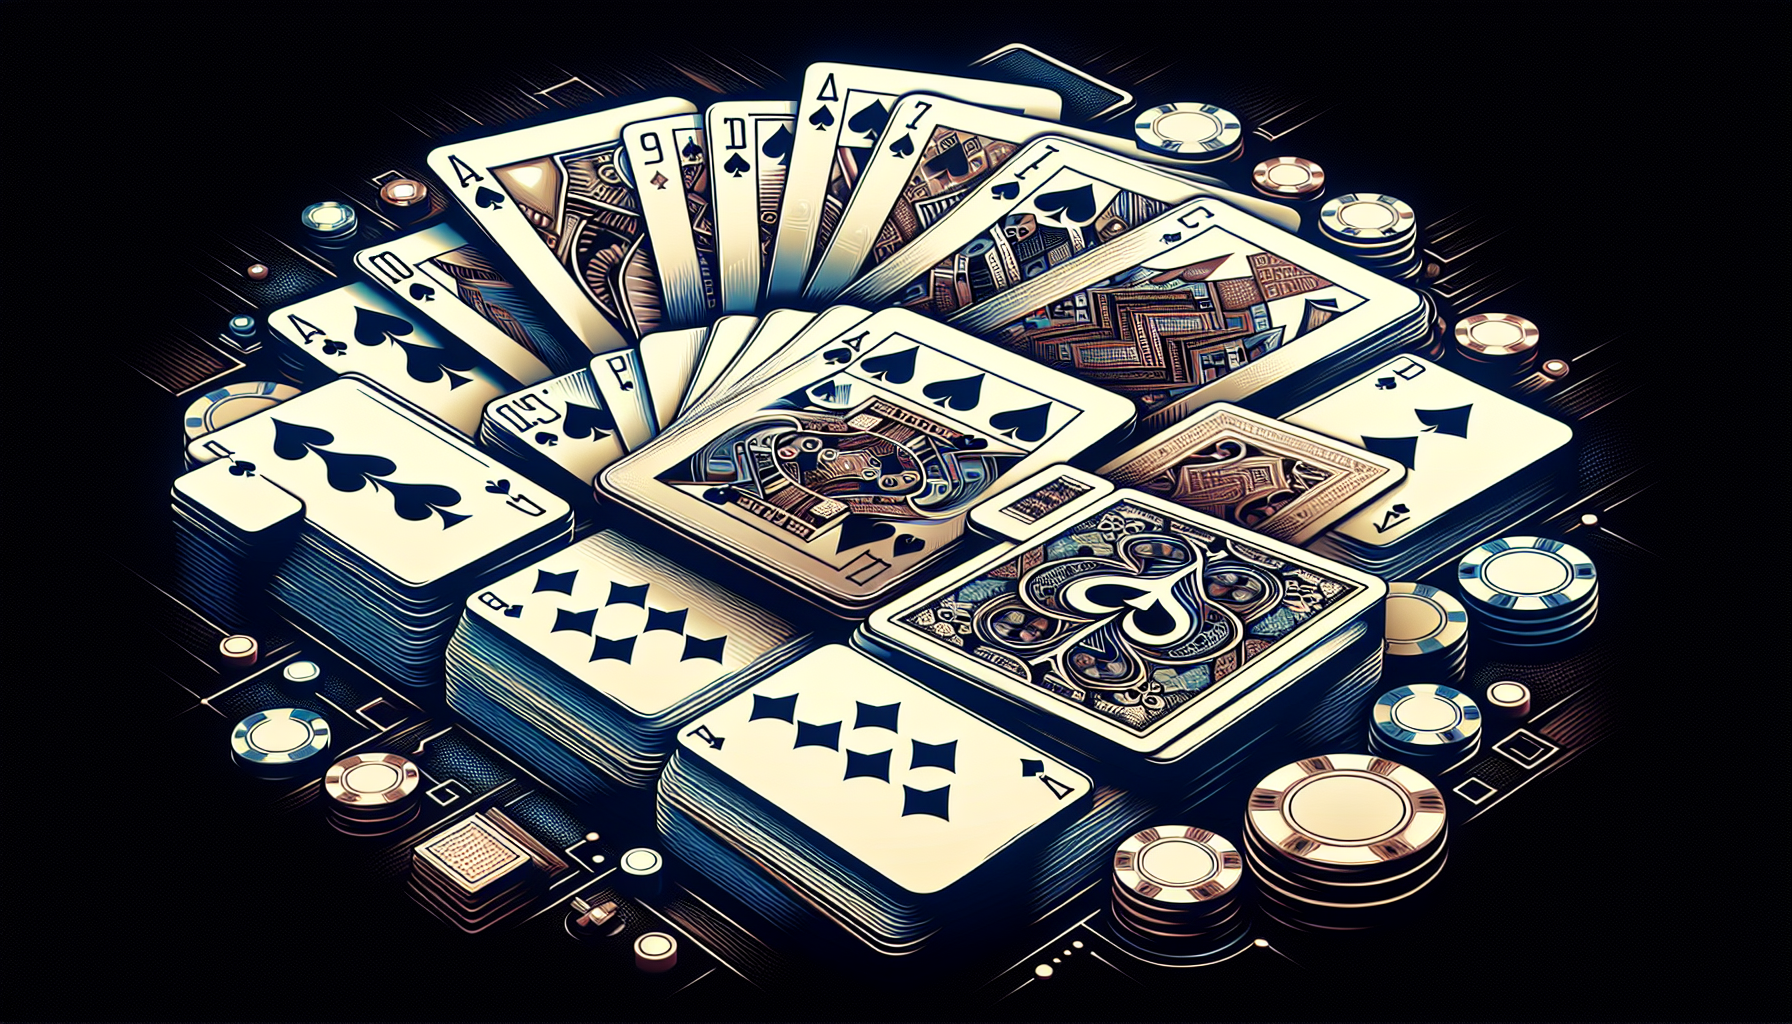 What are the popular strategies for online blackjack?